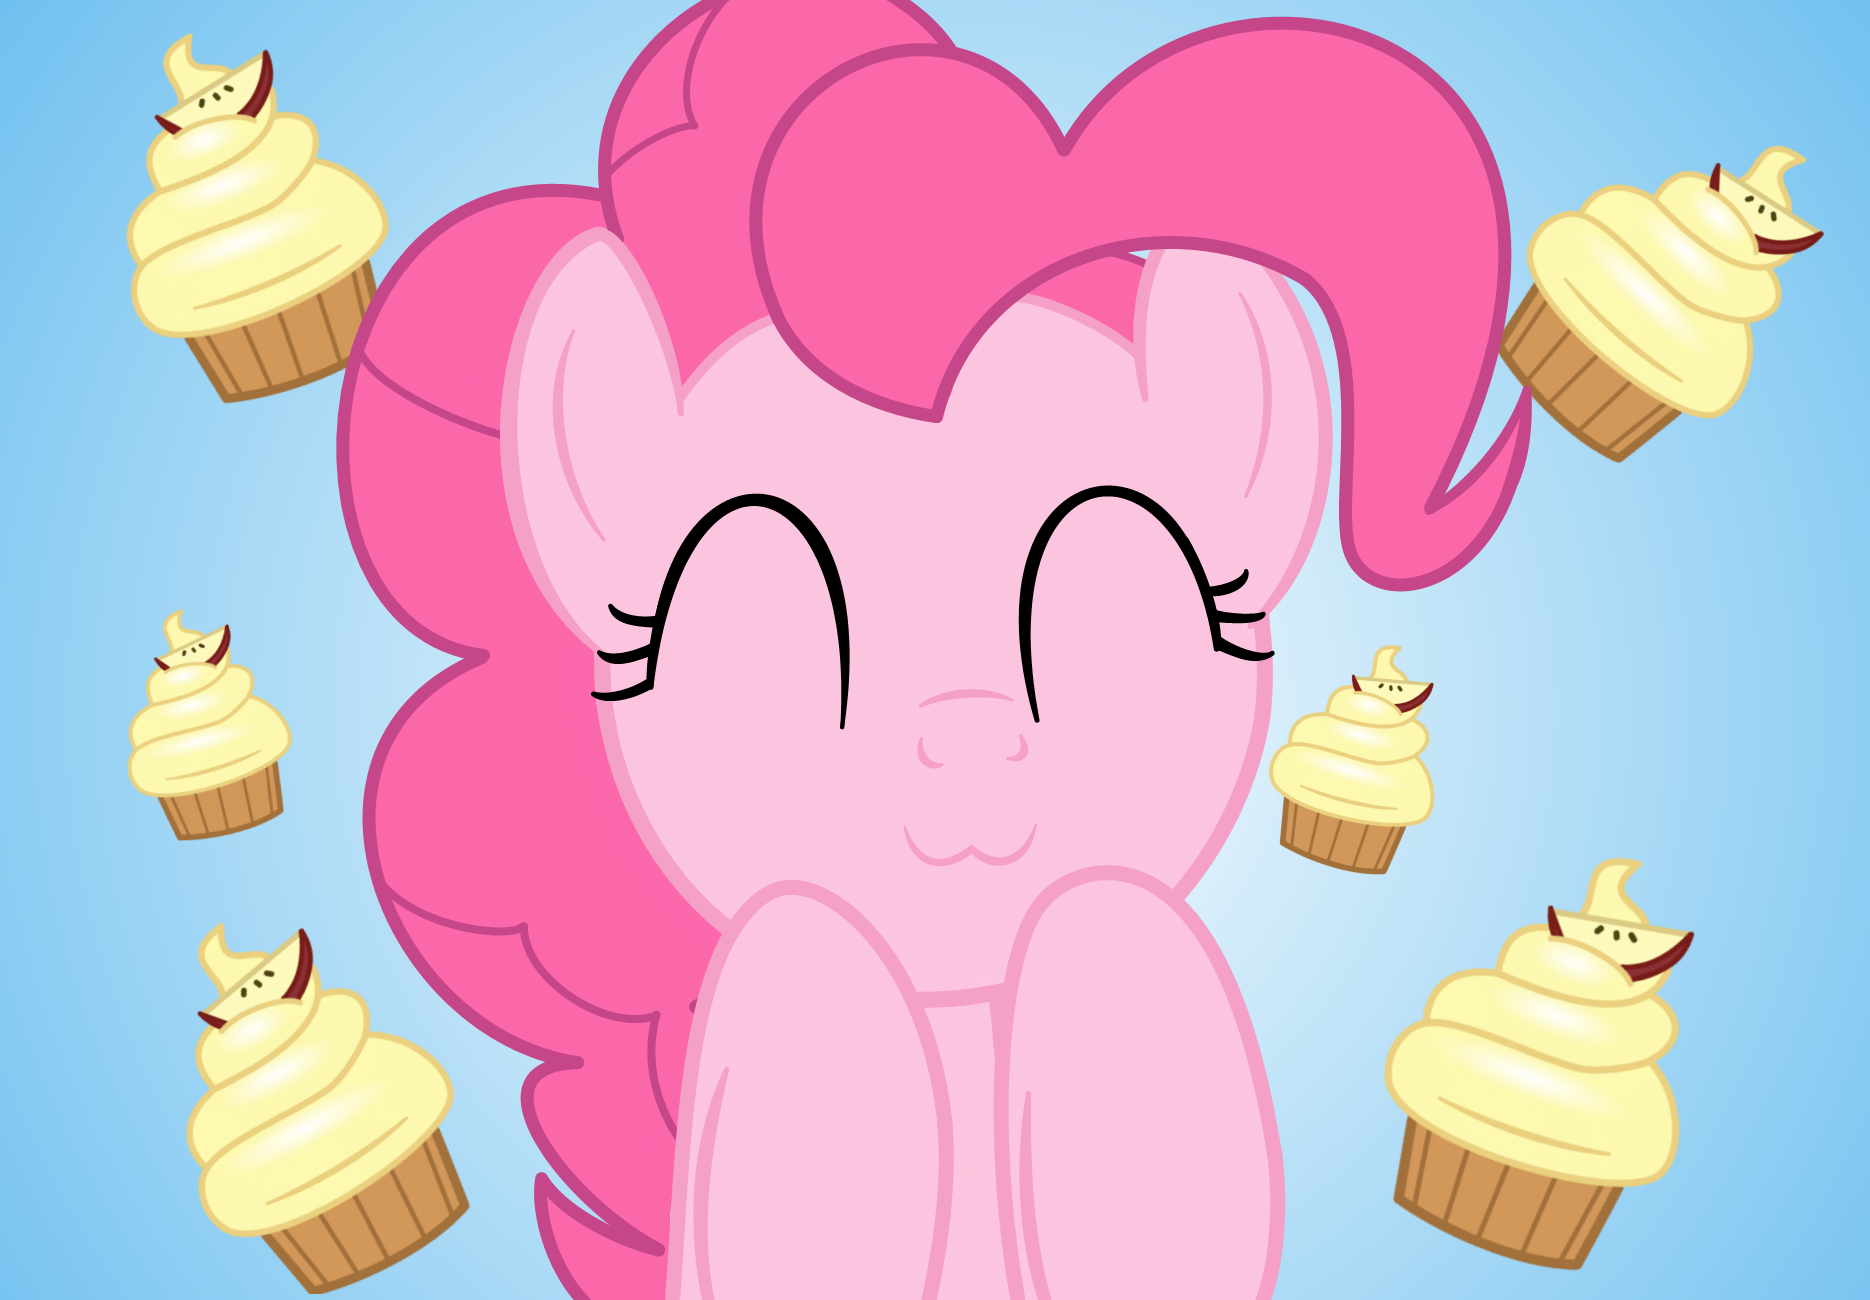 Cupcakes by MisterBrony